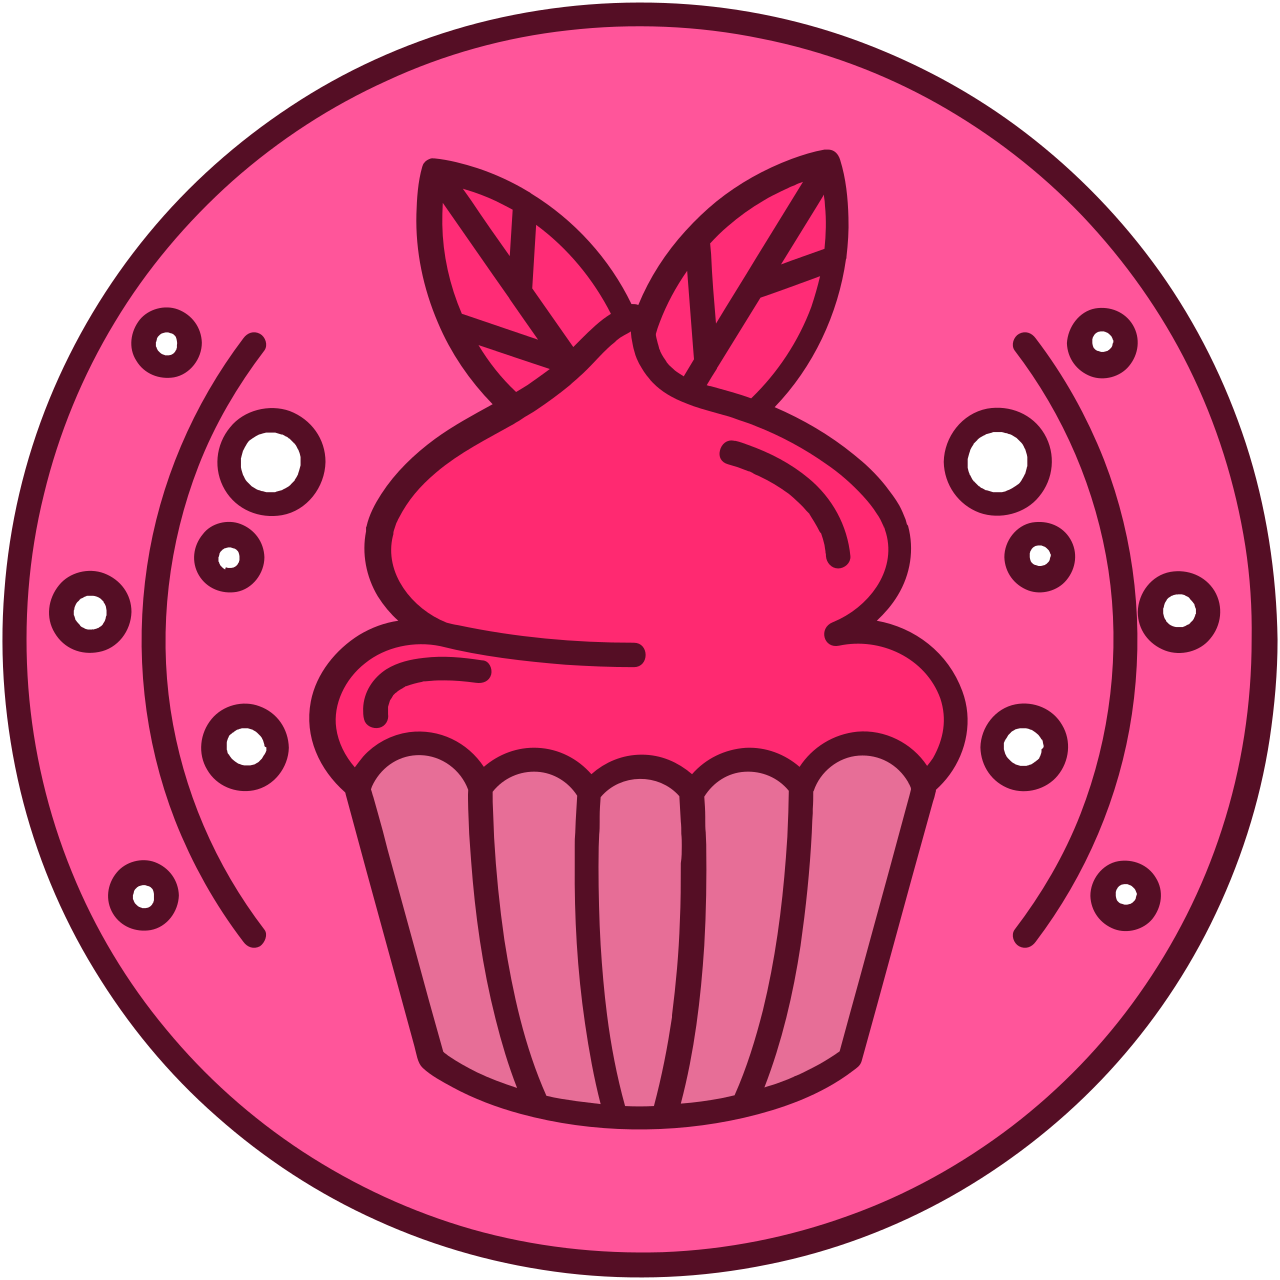 Sweetest Moments Events and Treats's logo